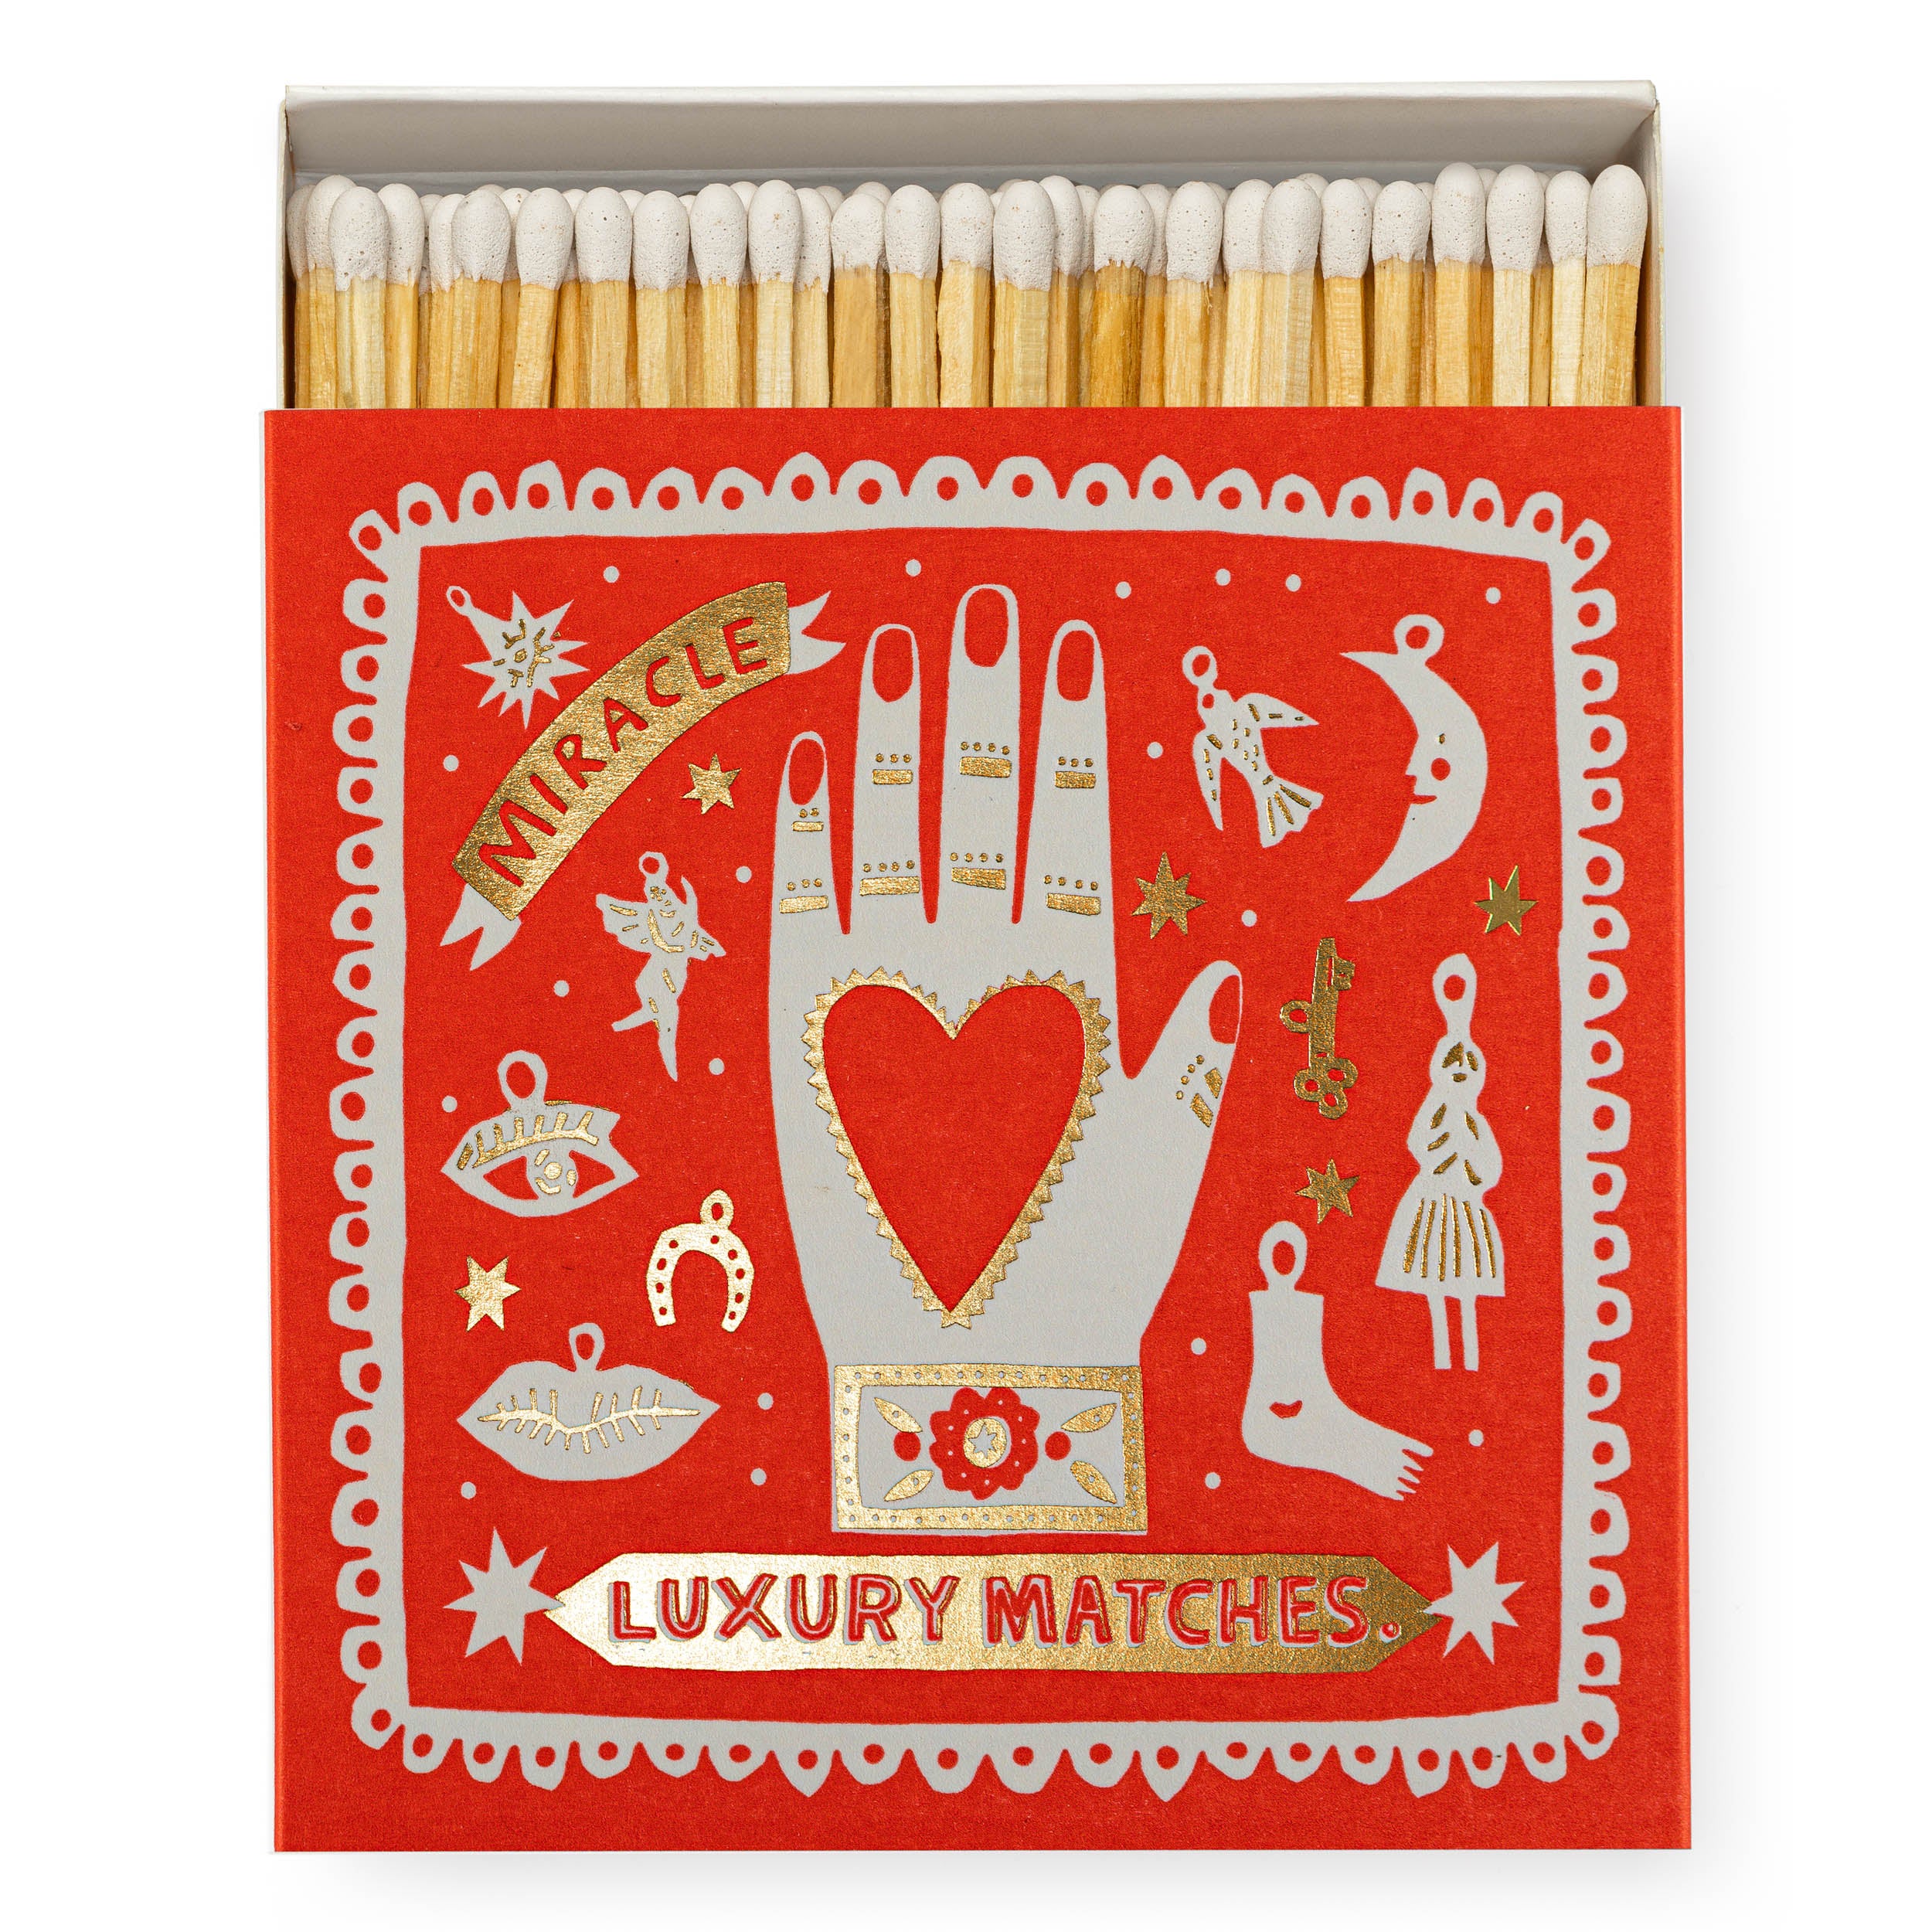 Archivist Square Matchbox - Miracle Luxury Matches